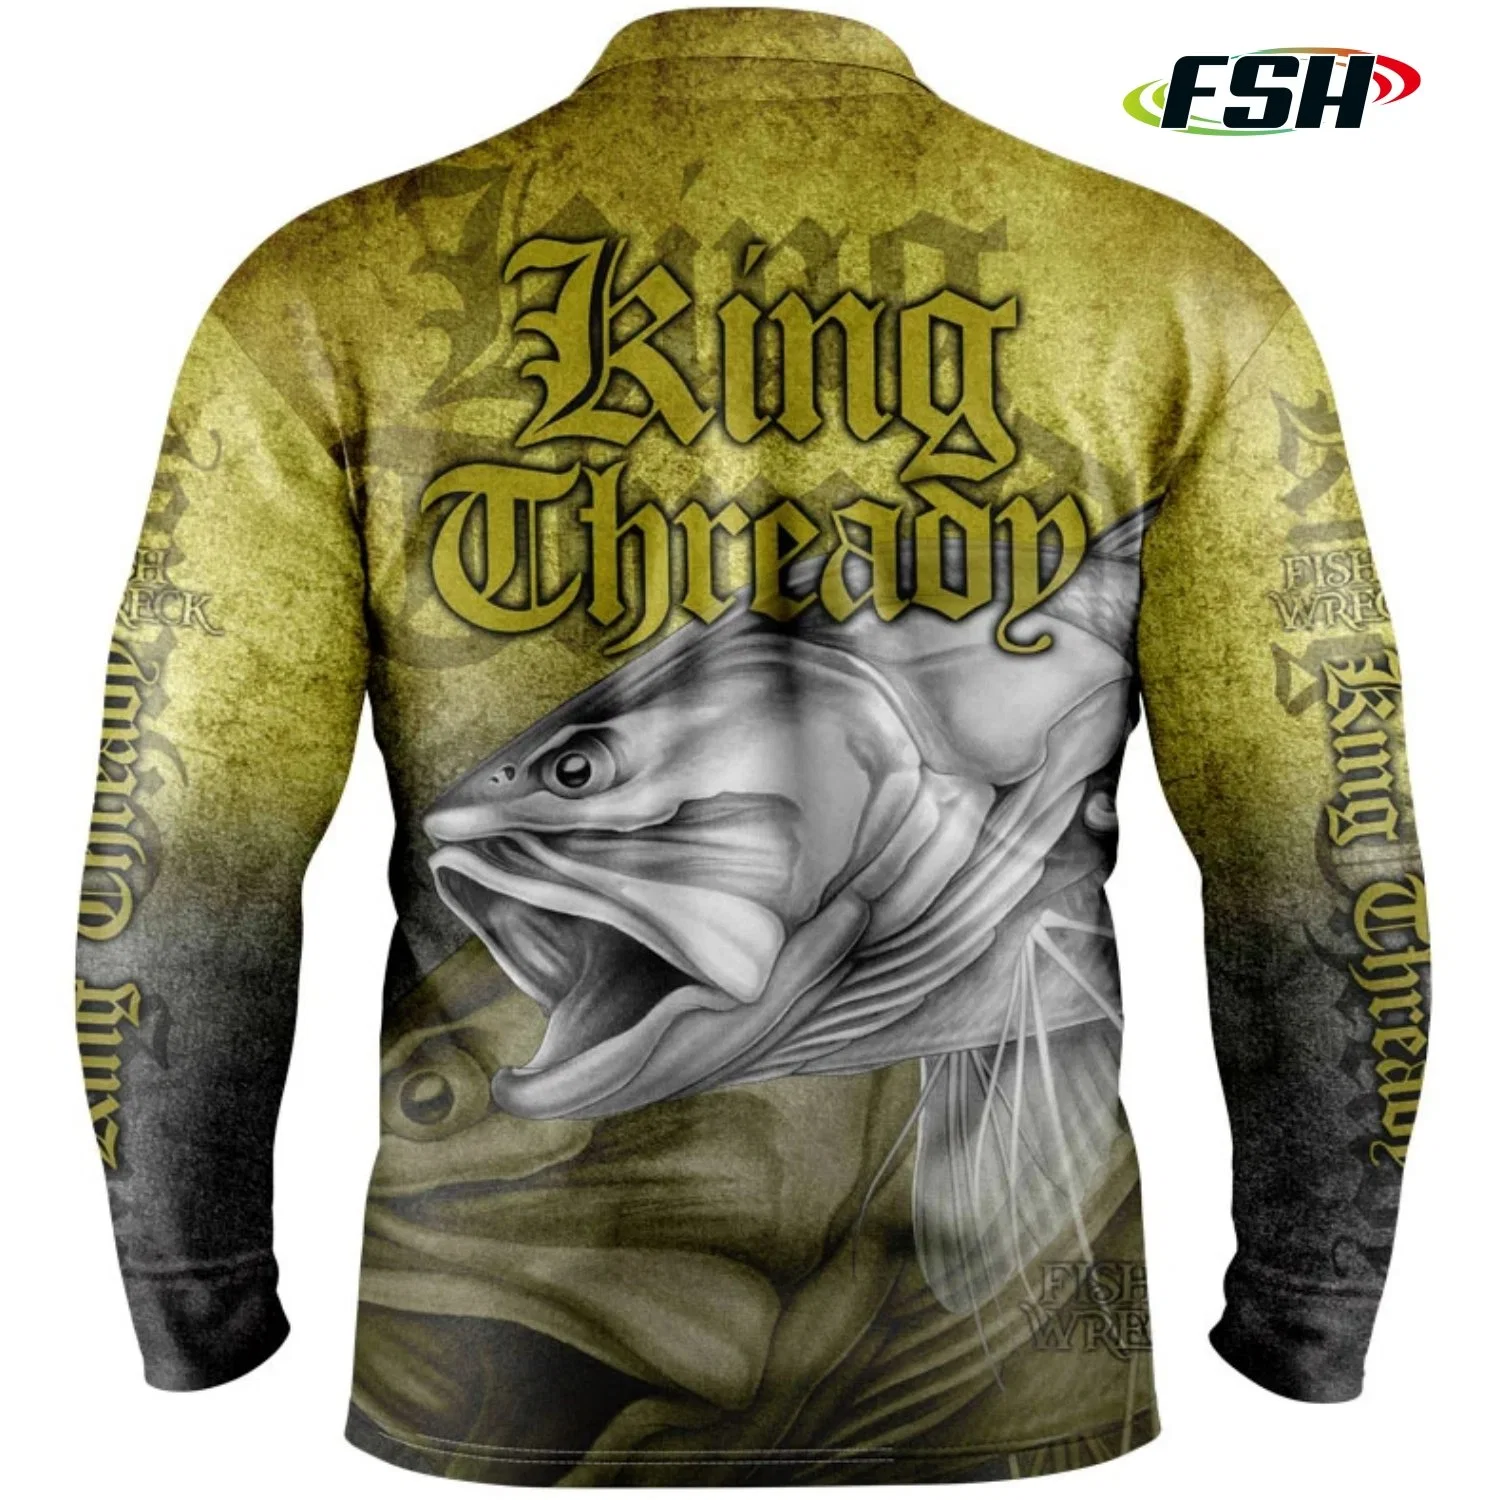 Latest Design Sublimation Polo Shirt Fishing Clothing Sports Wear Quick Dry